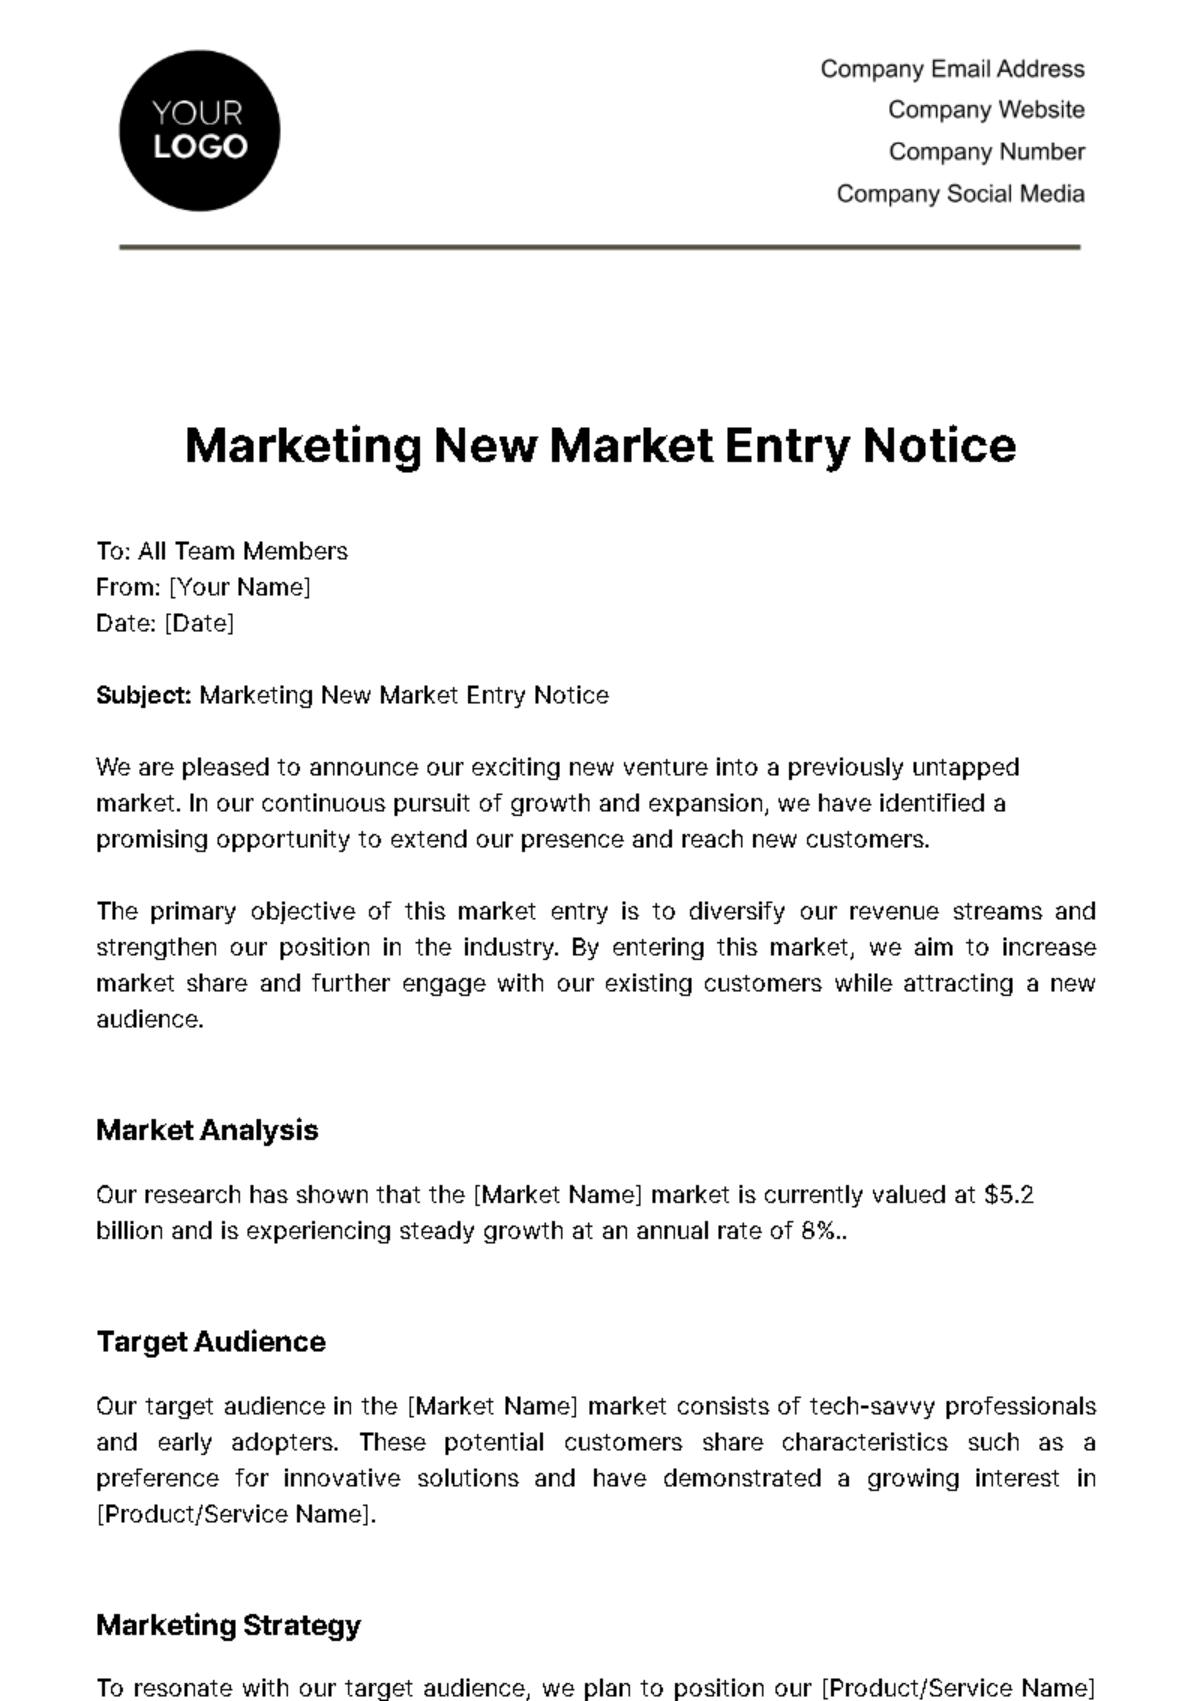 Marketing New Market Entry Notice Template